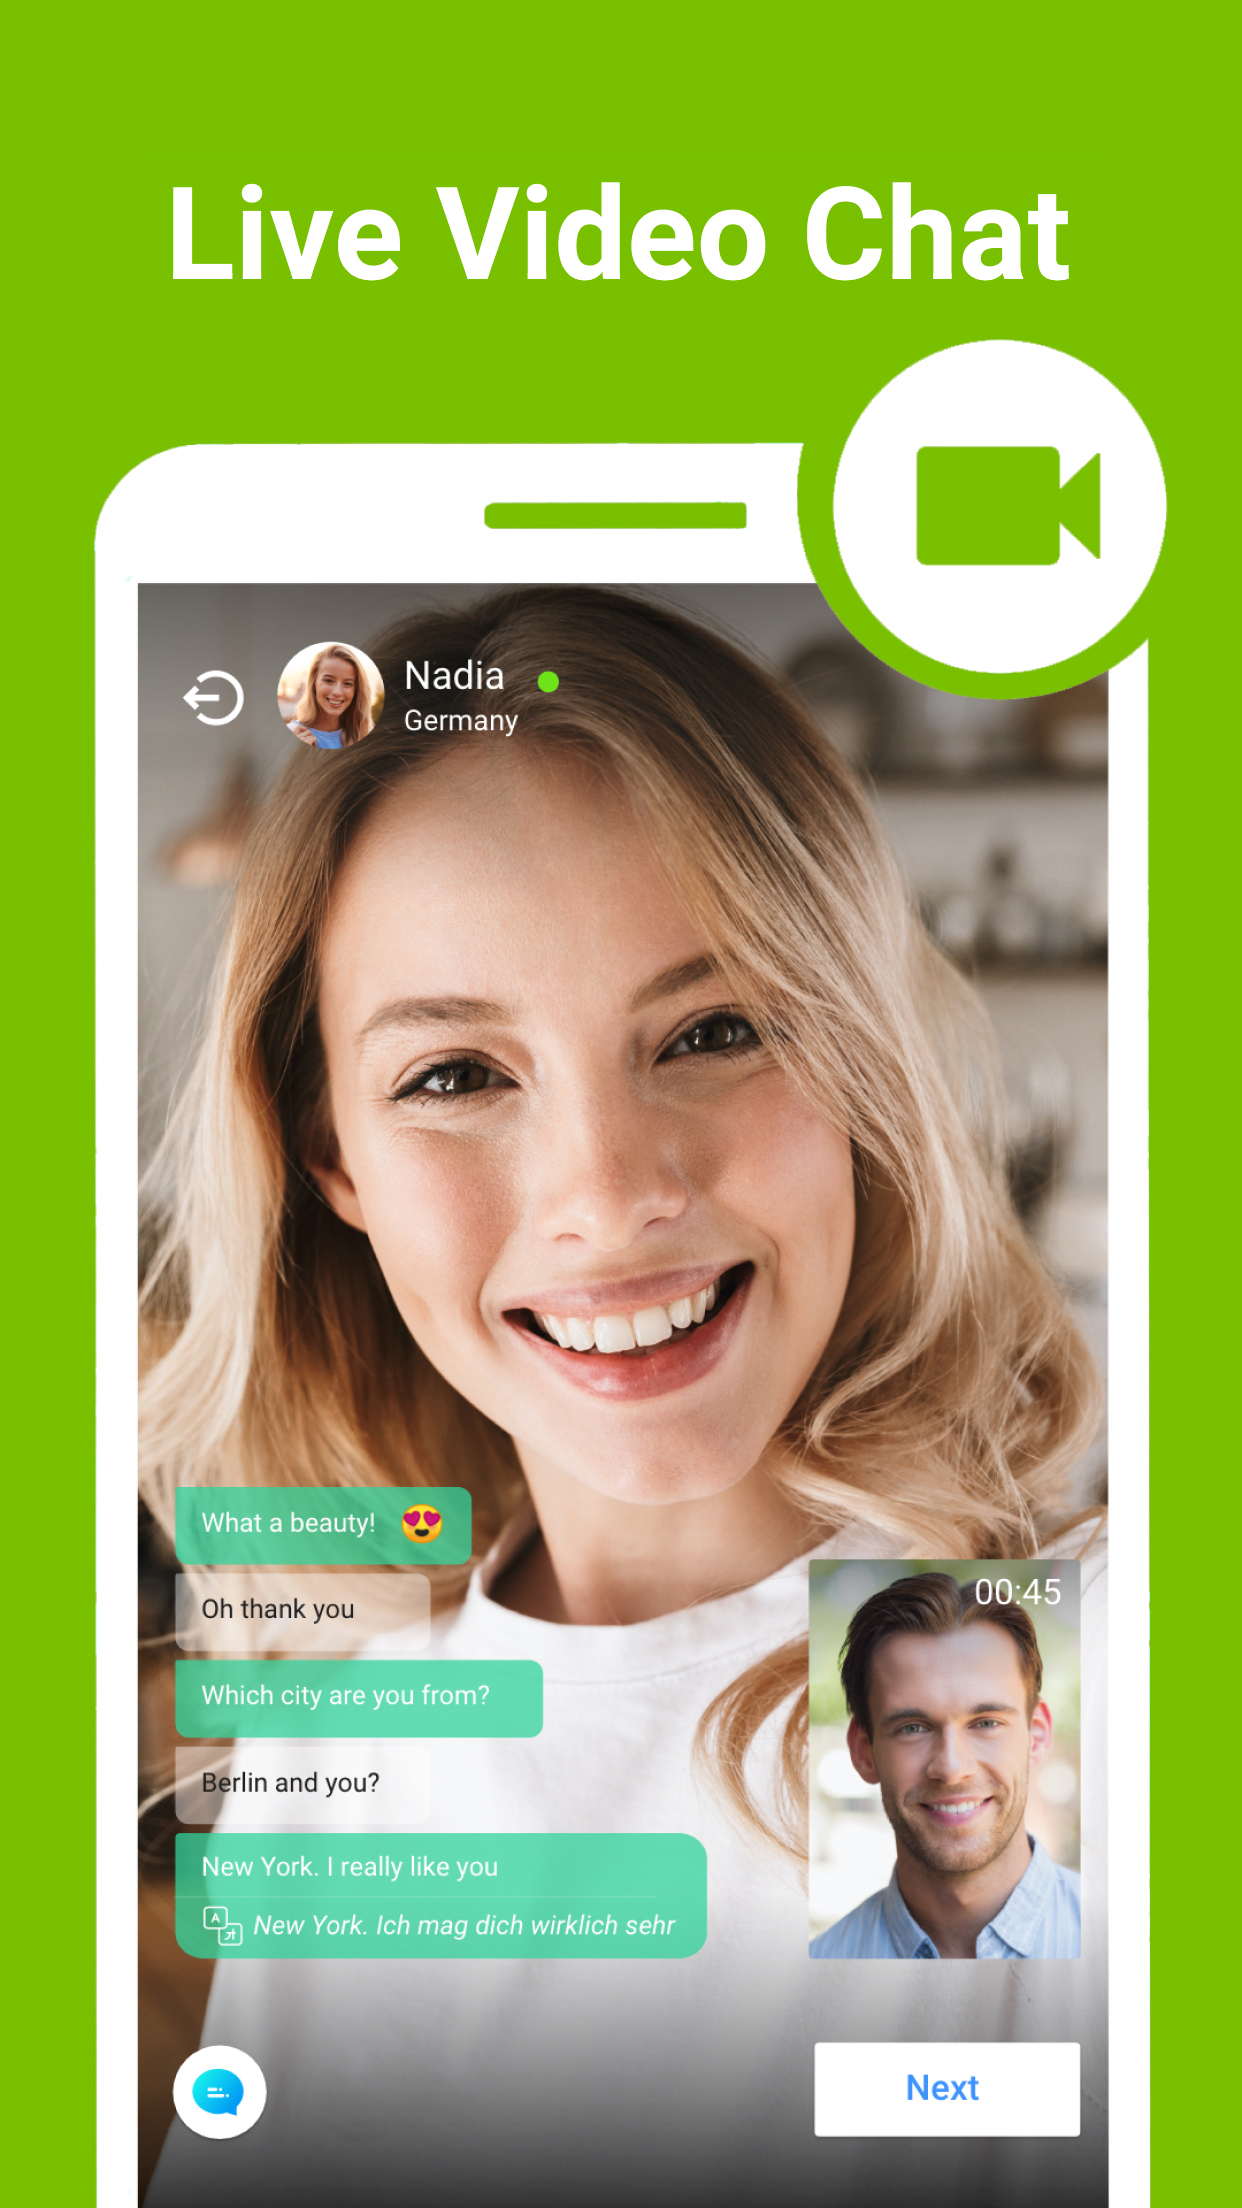 W-Match: Video Dating & Chat APK 2.13.3.1 for Android – Download W-Match:  Video Dating & Chat APK Latest Version from APKFab.com